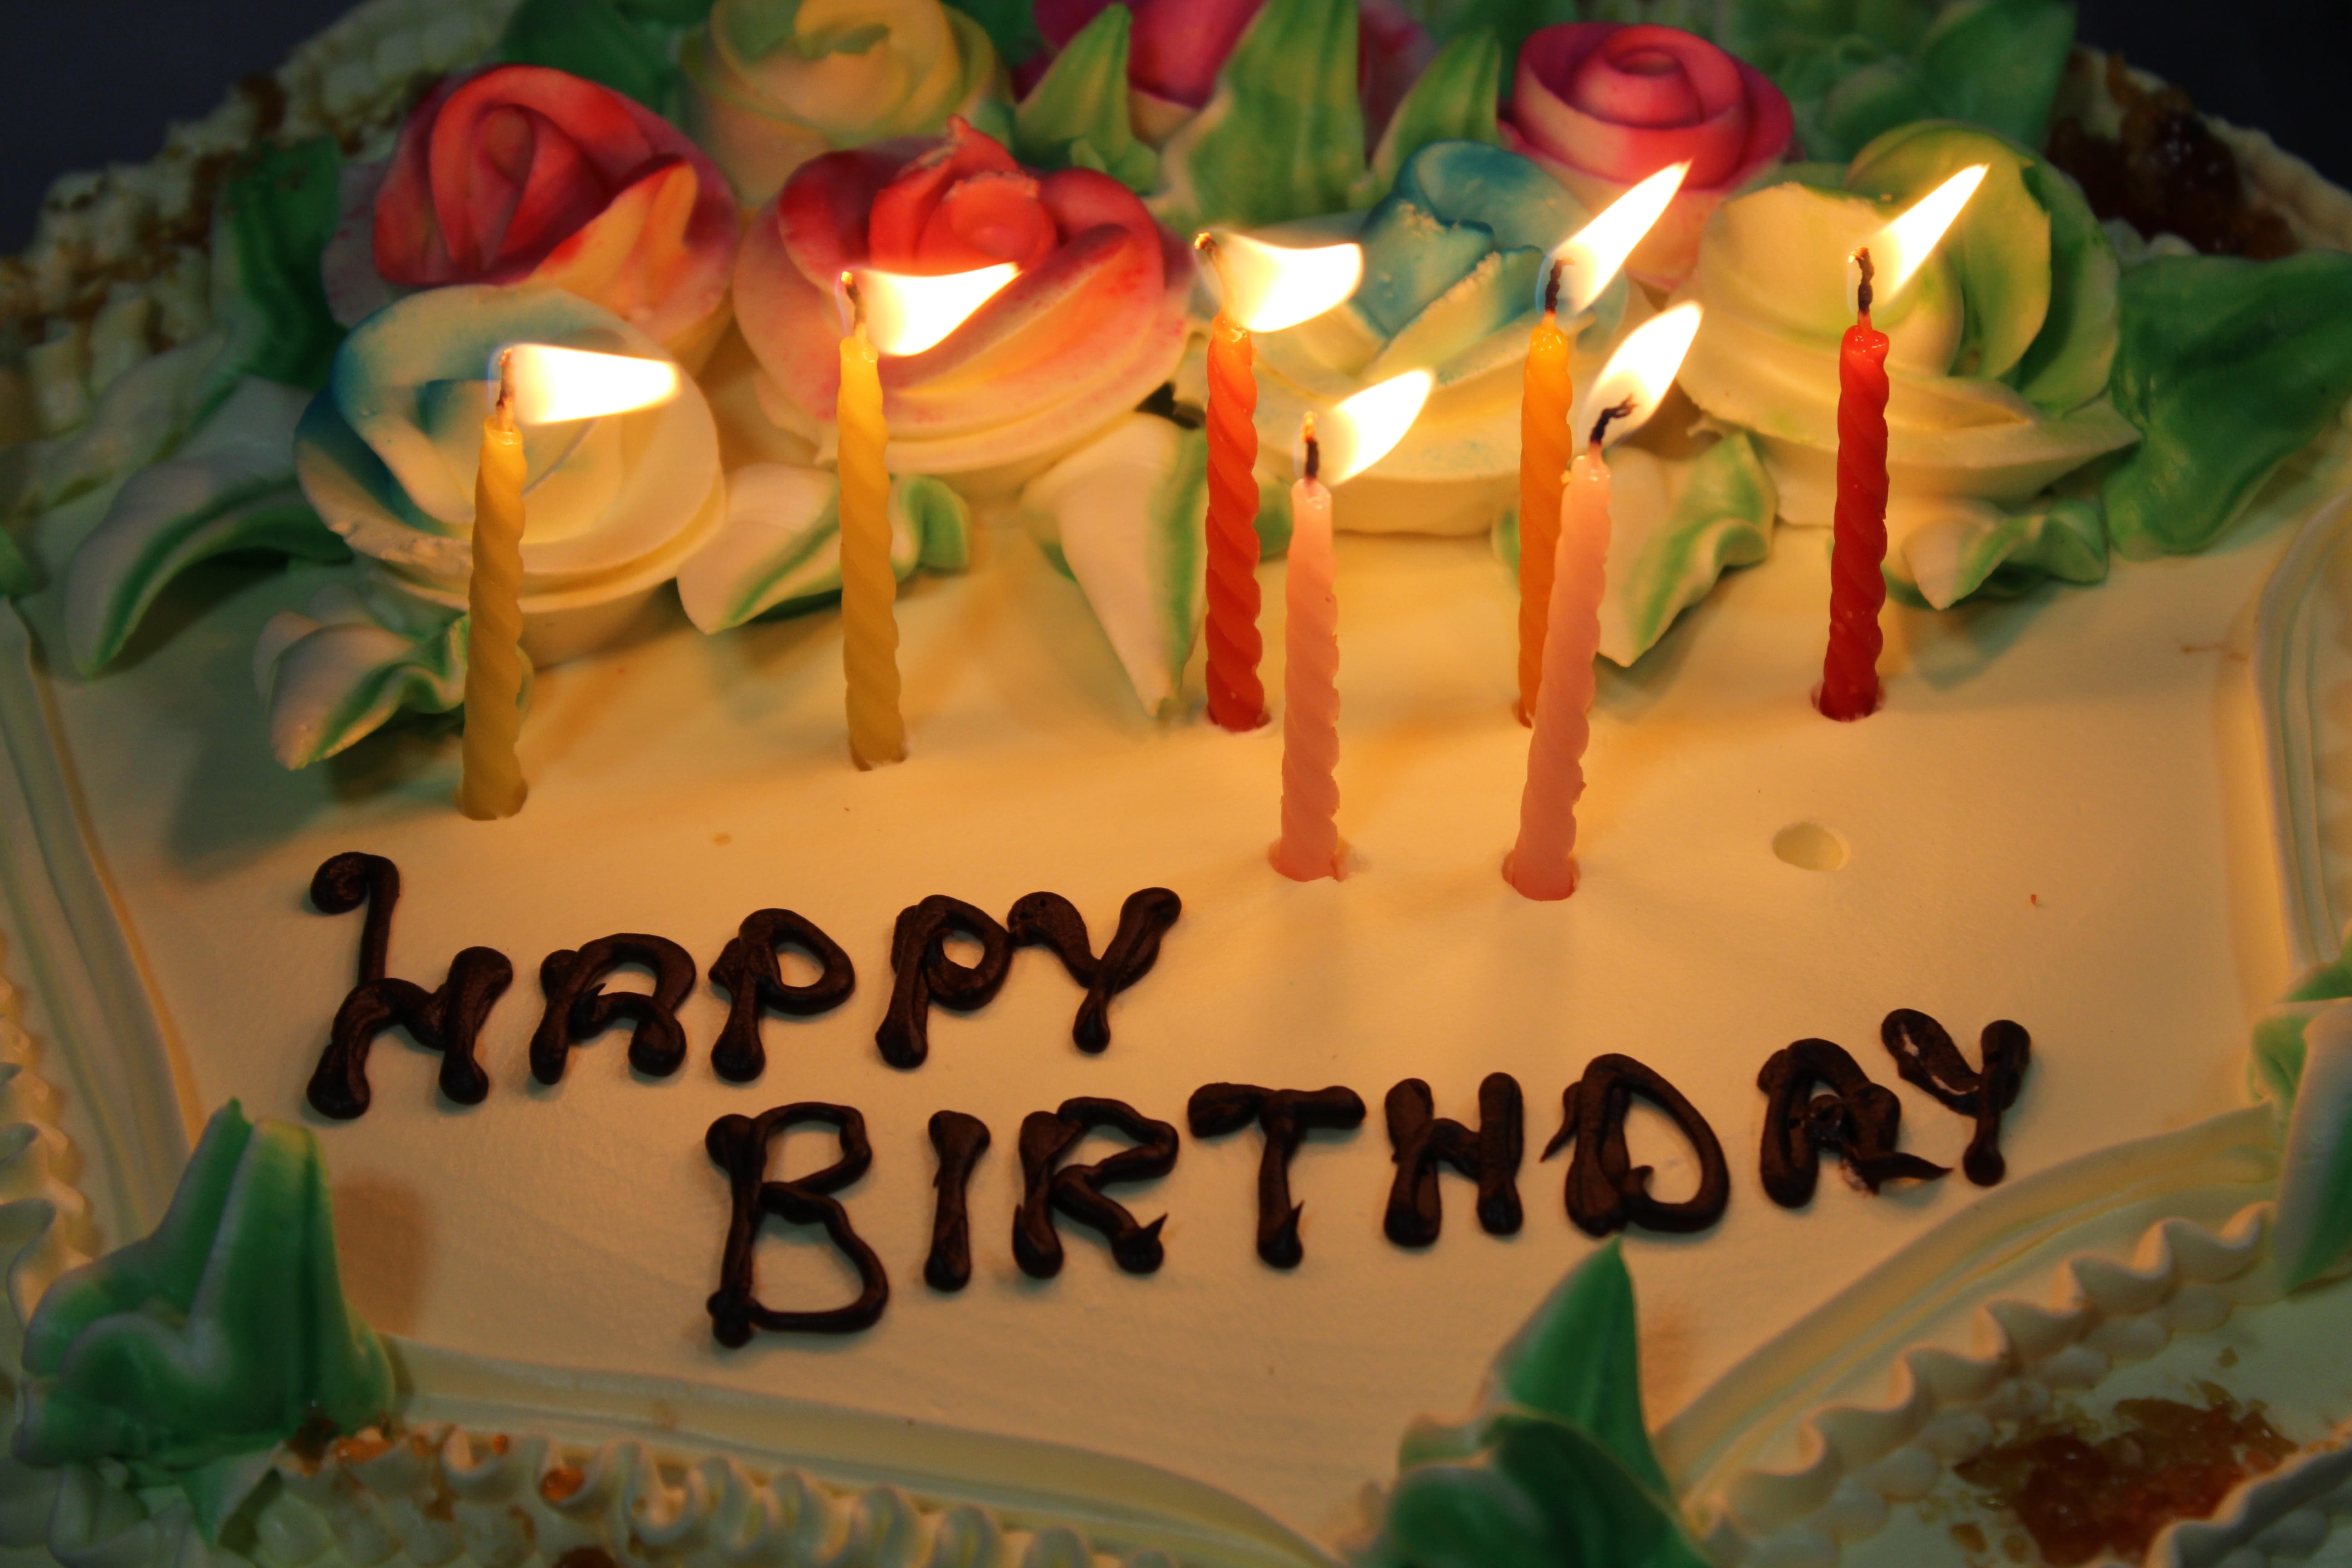 happy birthday cake with lighted candles, Birthday, Cake, Sweet